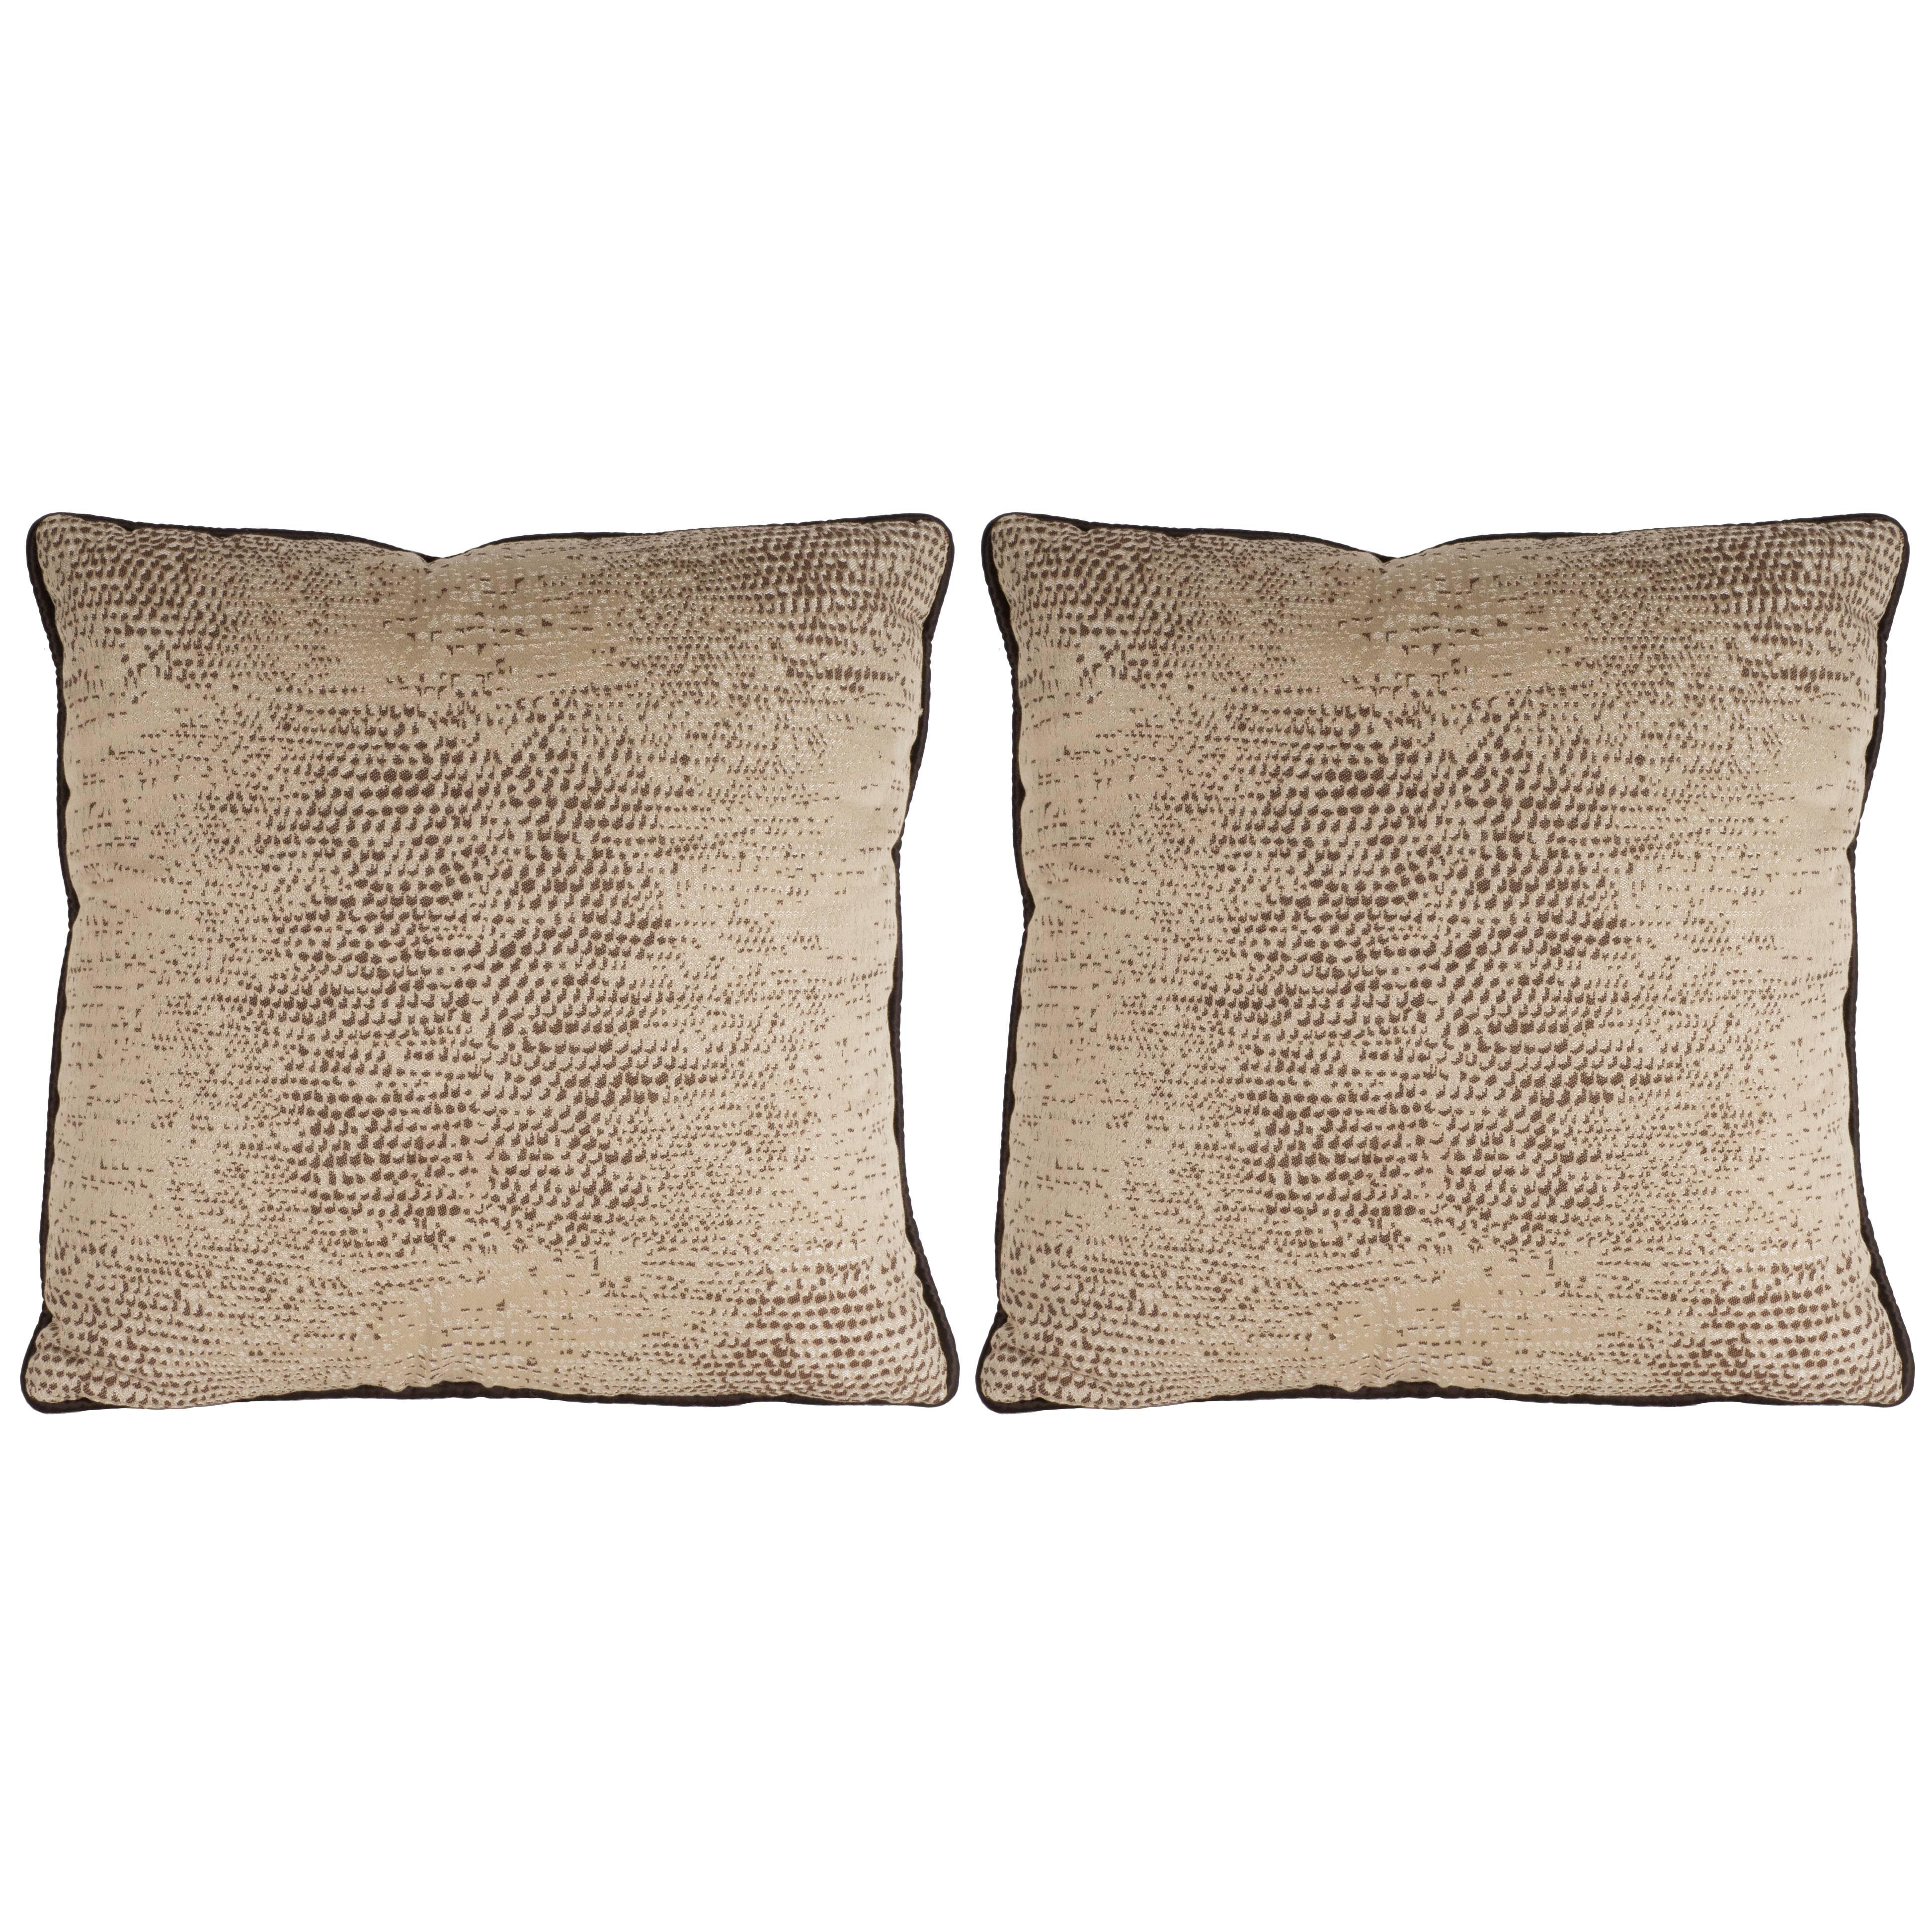 Pair of Modernist Pillows with Dark Chocolate Piping and Stylized Lizard Print